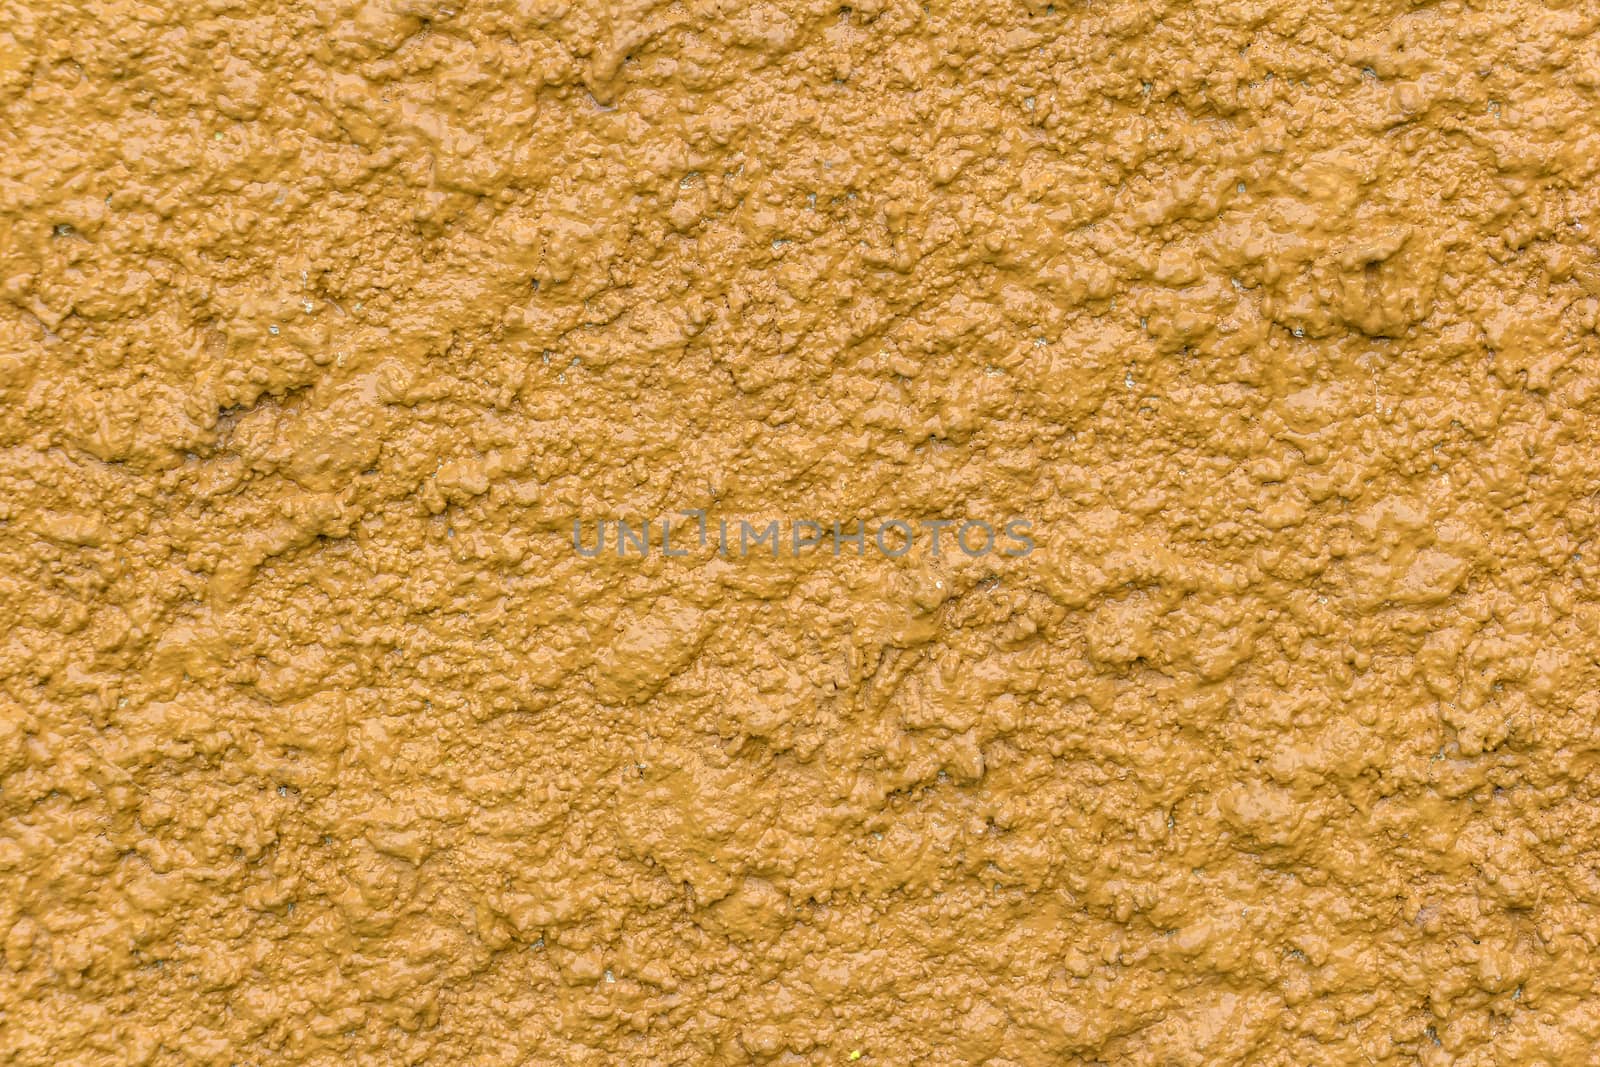 Yellow bump plaster wall coating with oil paint texture